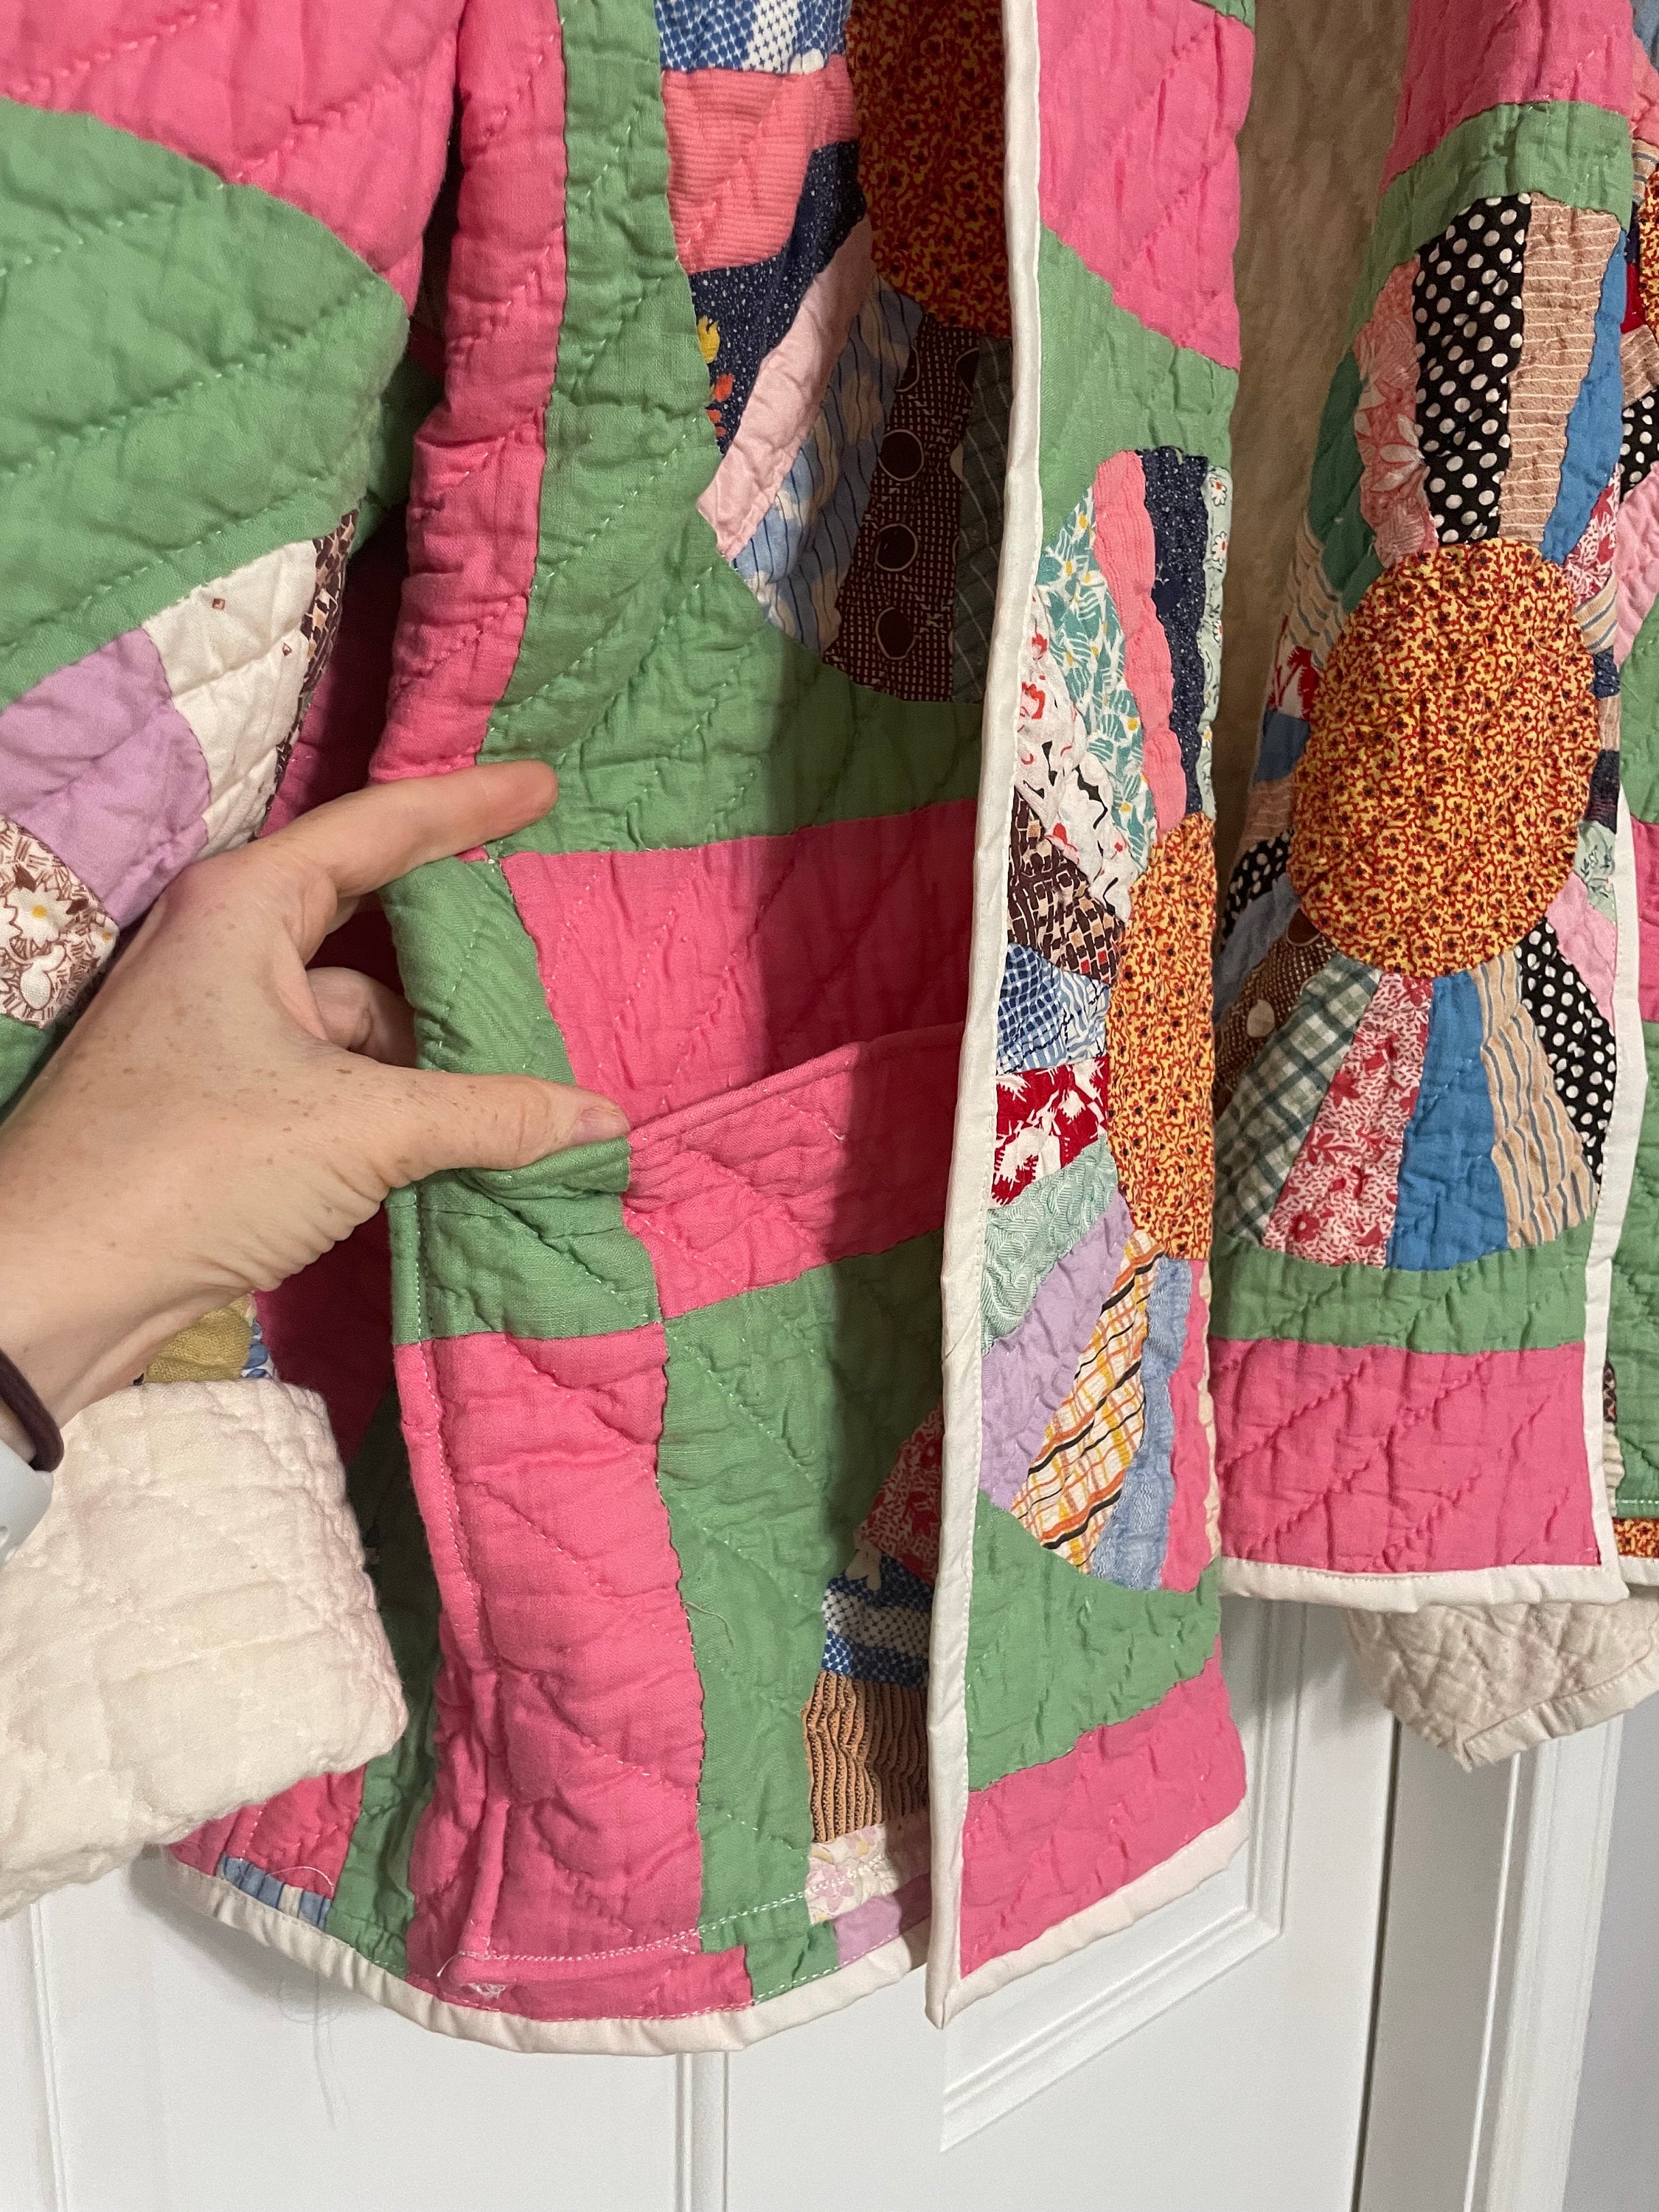 One of A Kind Quilt Coat, Dresden Pattern With Amazing Bright Pinks and ...